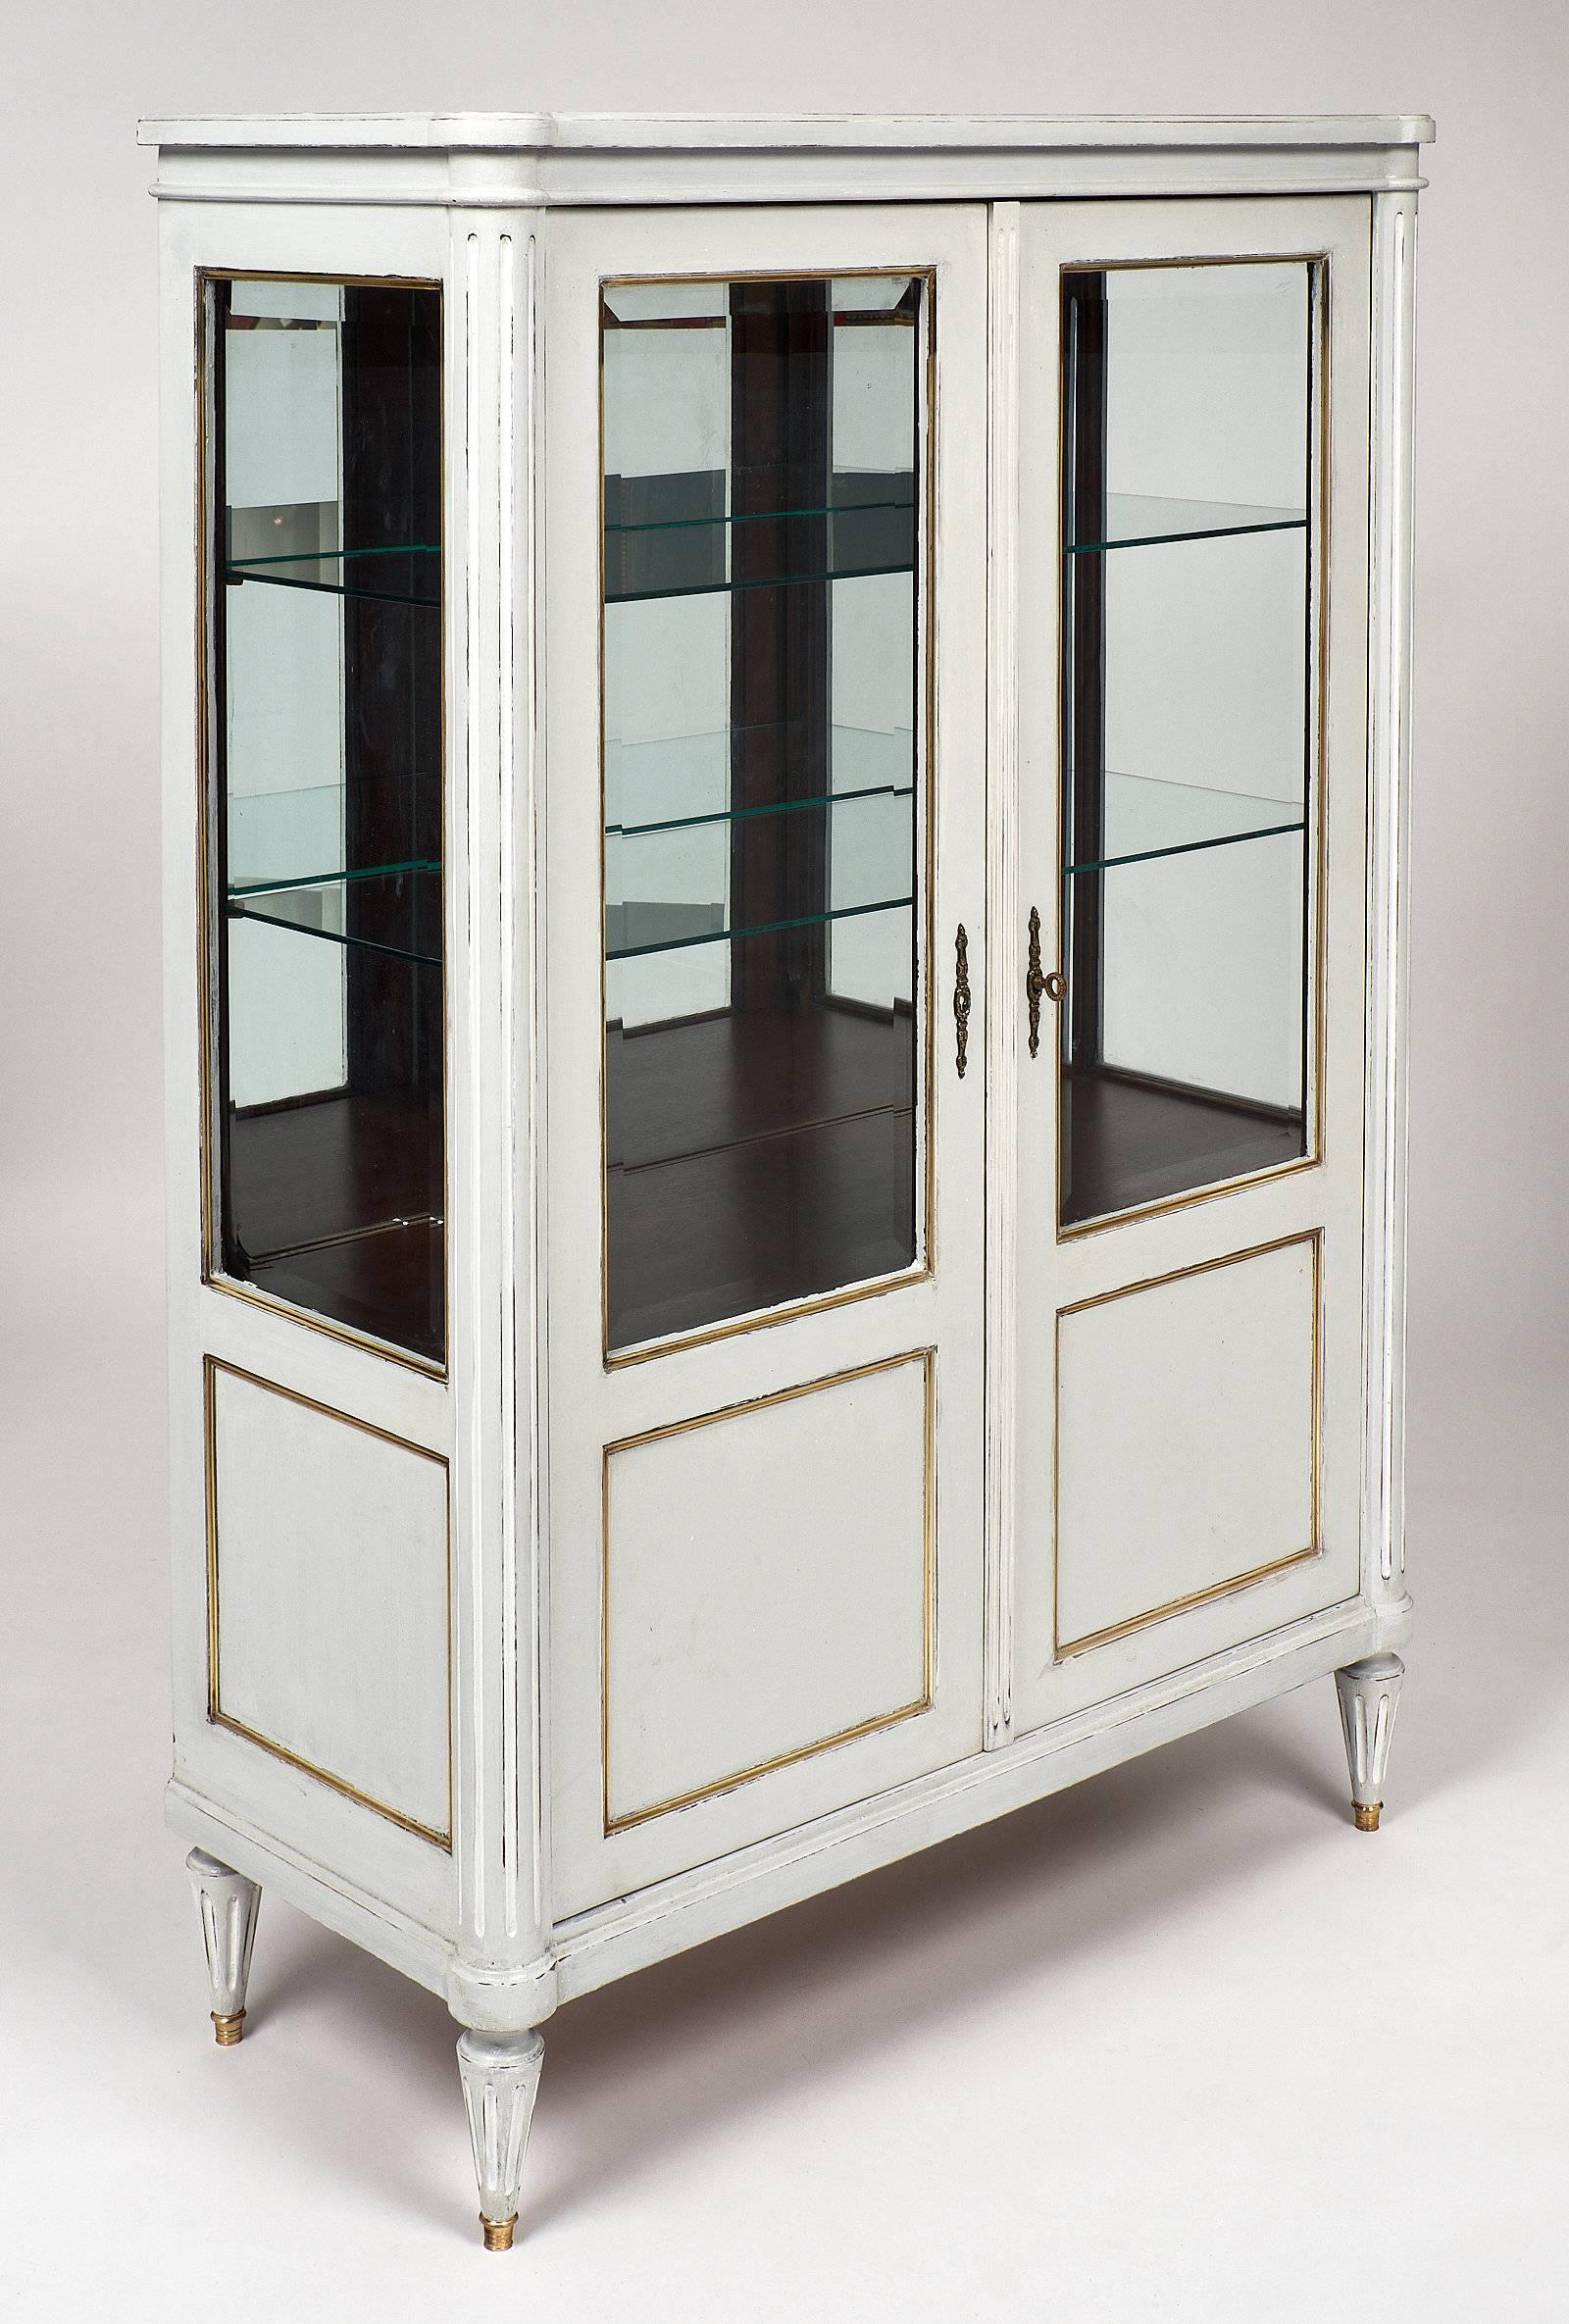 French Louis XVI antique vitrine/bookcase with beveled glass doors and sides. This piece was painted and patinated with a combination of dove gray and white milk paint. Fluted and tapered legs with brass feet and the gilt trims throughout accent the